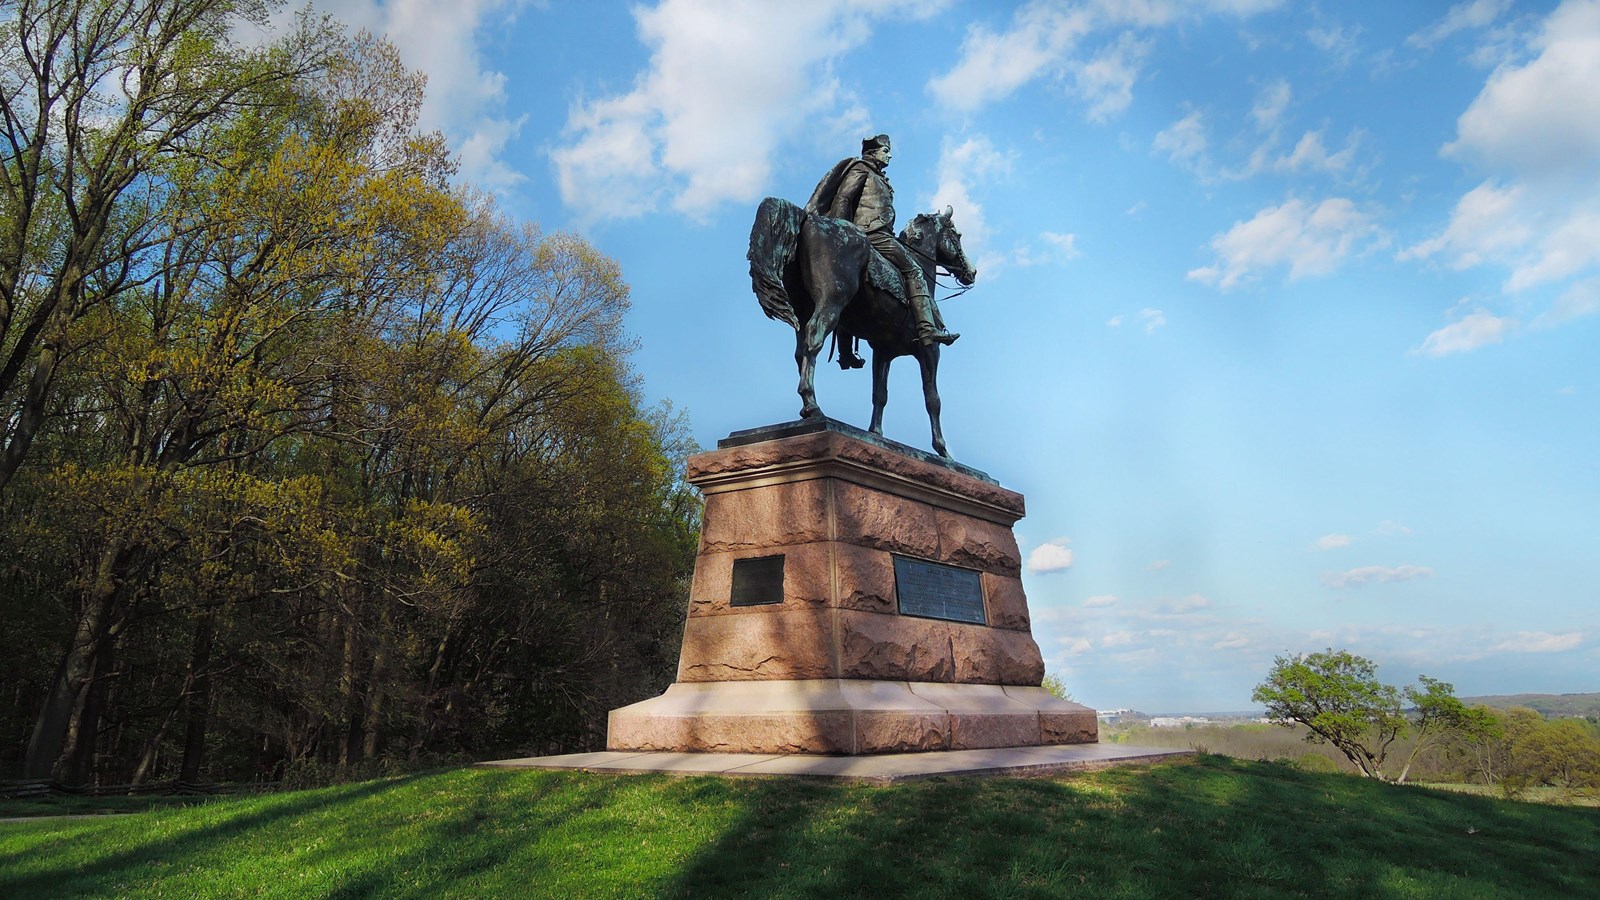 outdoors, grass, clouds, trees, monument, statue, horse, plaque